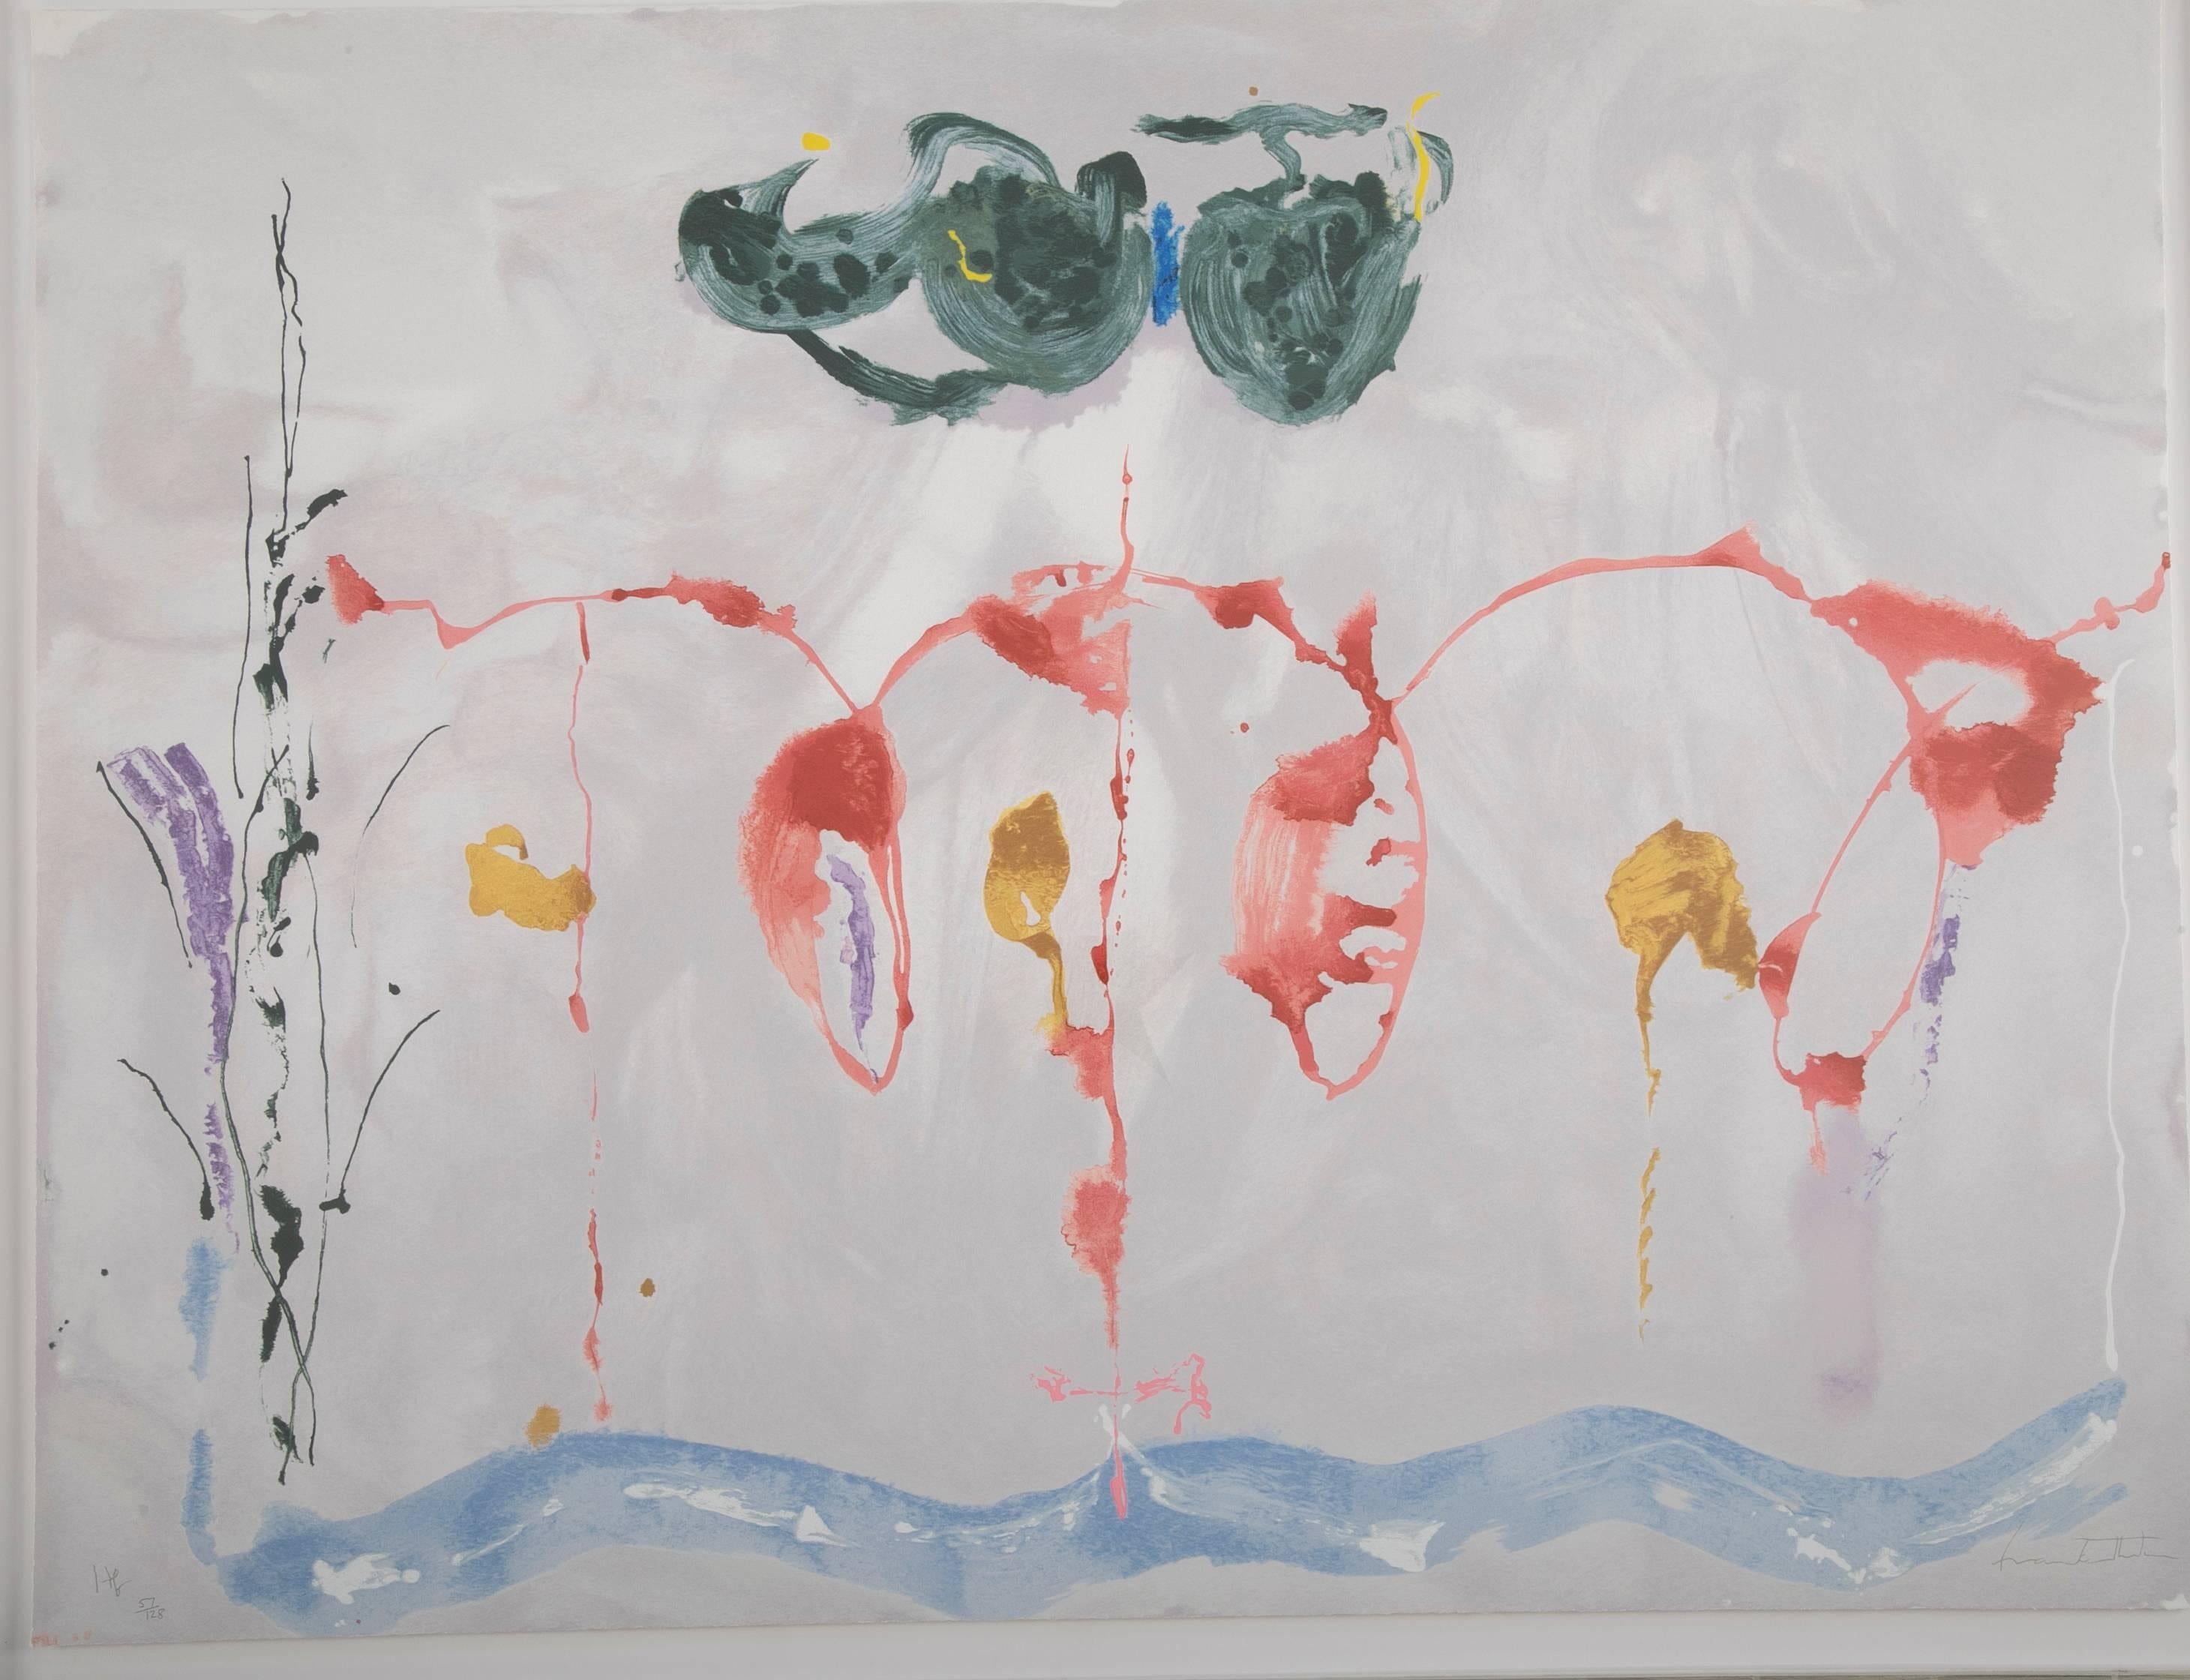 A Serigraph print by Helen Frankenthaler, circa 2009. Full sheet with deckled edge and full bleed to edges. Initialled and numbered 57 from the edition of 128 aside from 20. Artist proofs published by Lincoln centre. Printed by Brand X